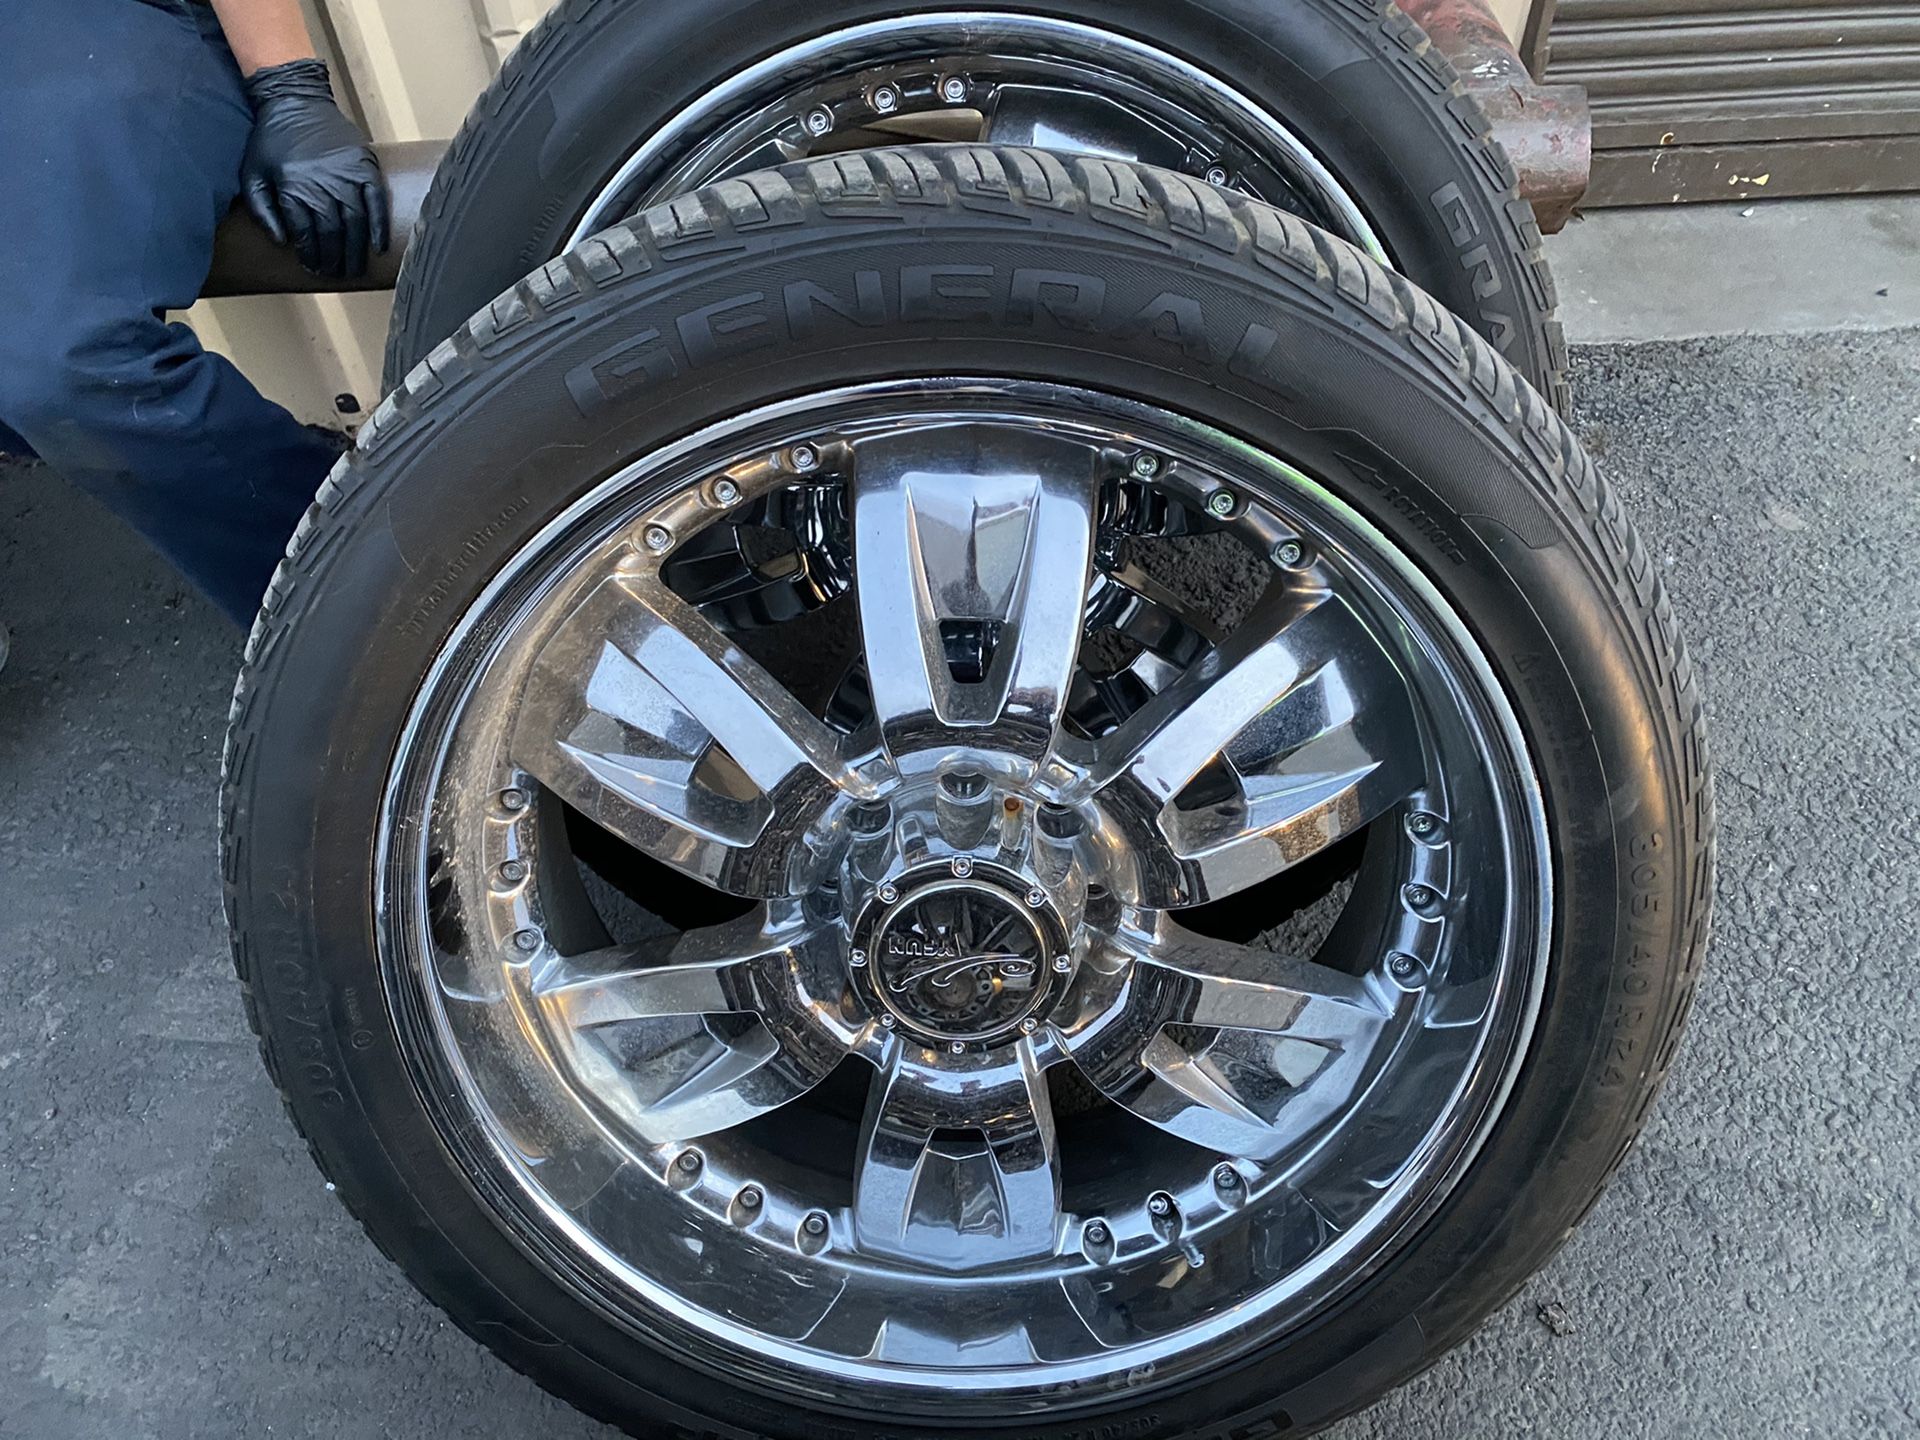 24” wheels/tires chrome wheels no scrapes tires are 80% 305/40/24 set is in great condition were on a Hummer h2 will fit Chevrolet truck